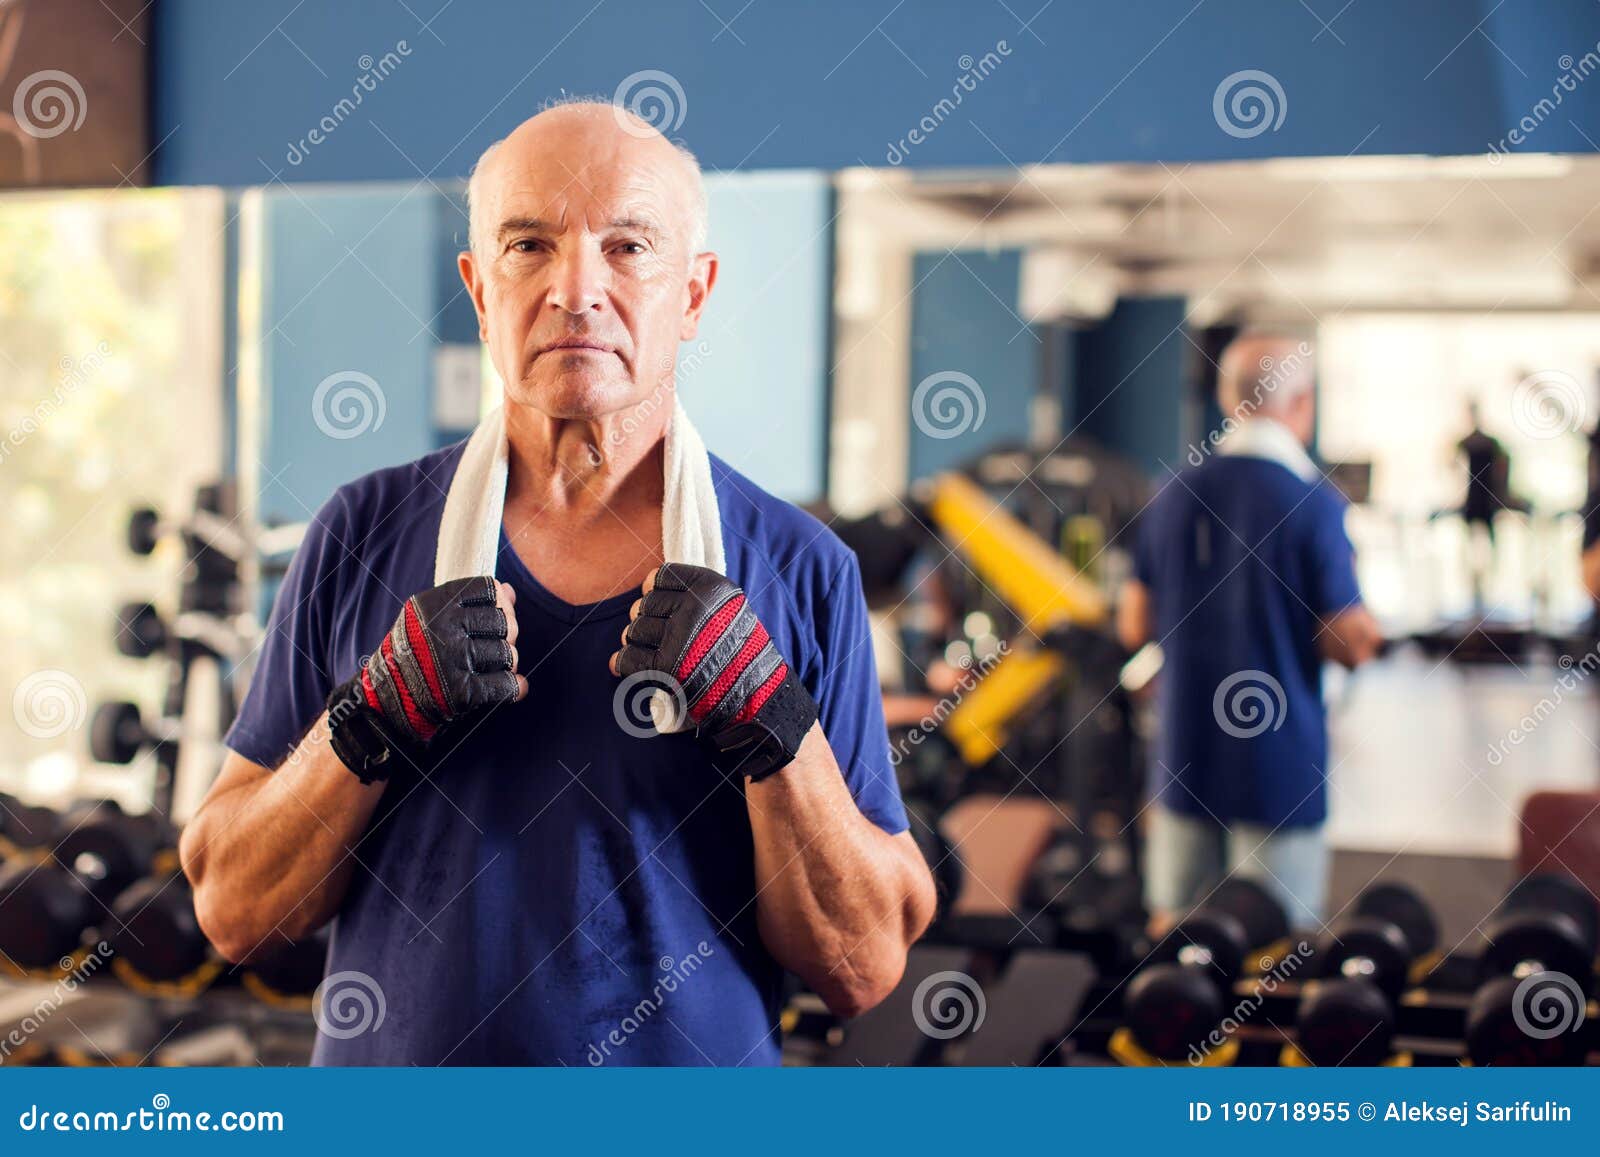 A Portrait of Senior Man in the Gym. People, Health and Lifestyle ...